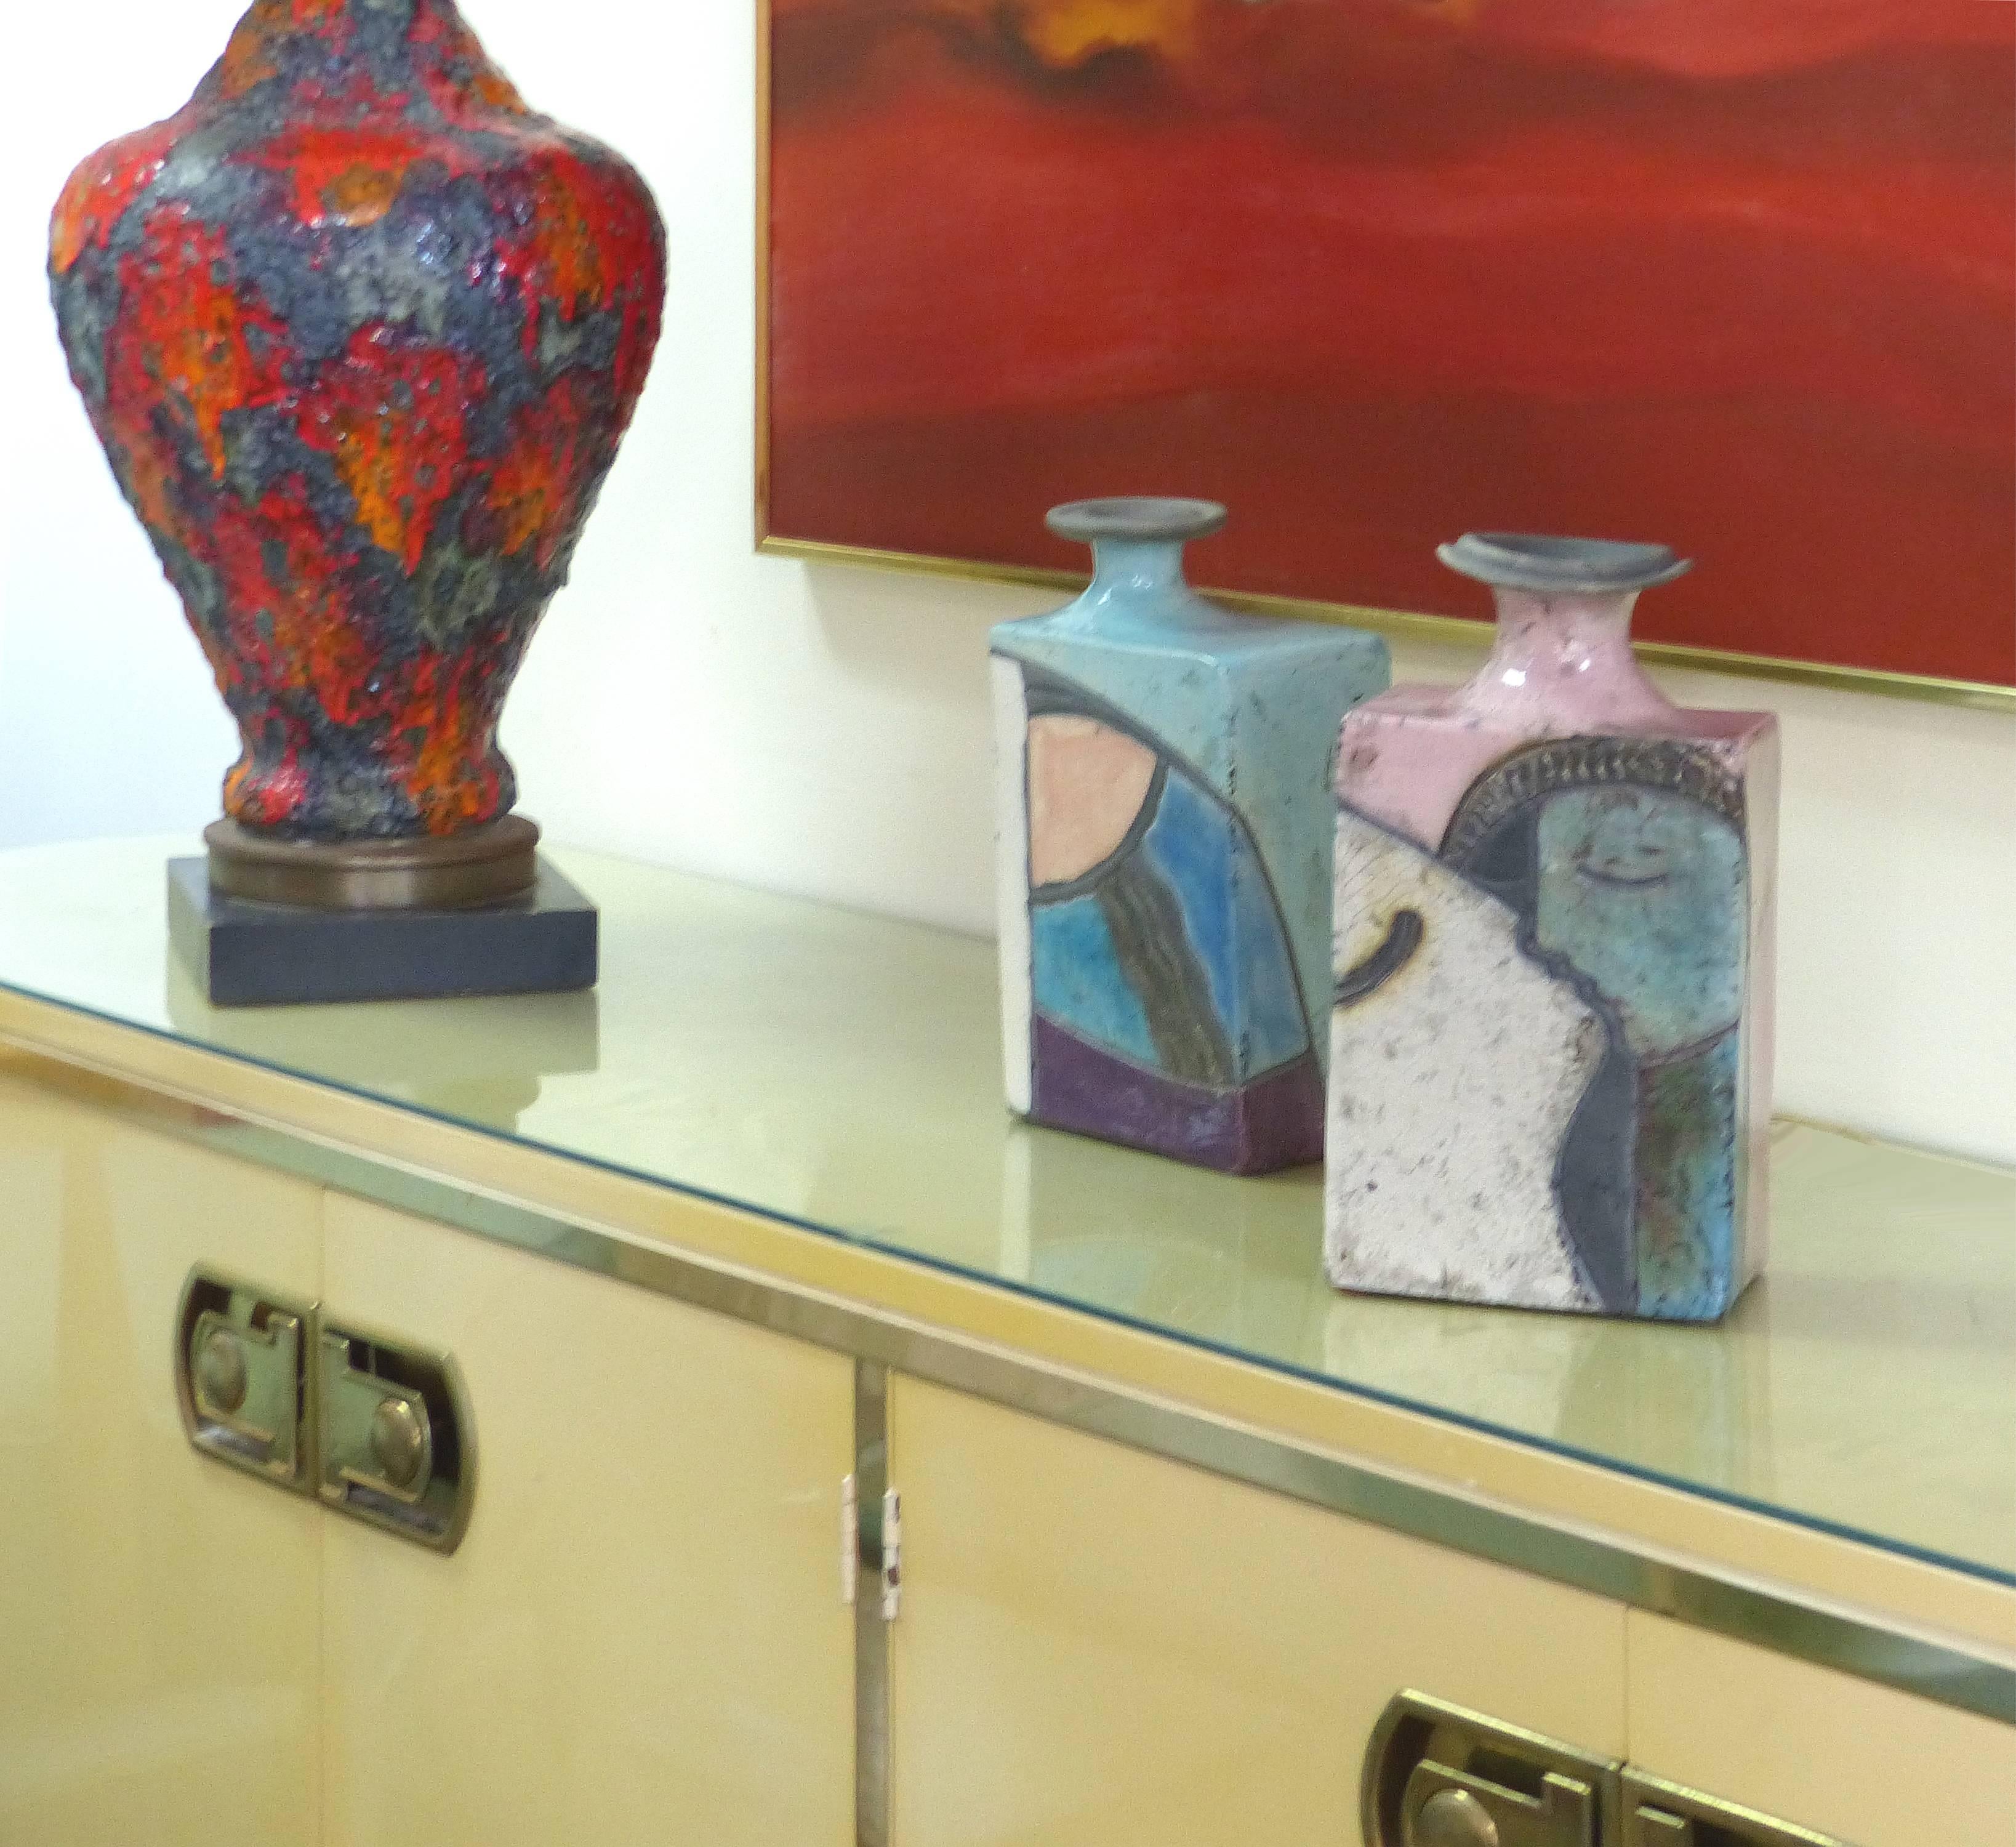 Offered for sale is a pair of hand bilt modern ceramic vases with incised and glazed abstract compositions. The vases each have complimentary decorations in rich hues and are signed within the designs on the sides. Their variations in size and